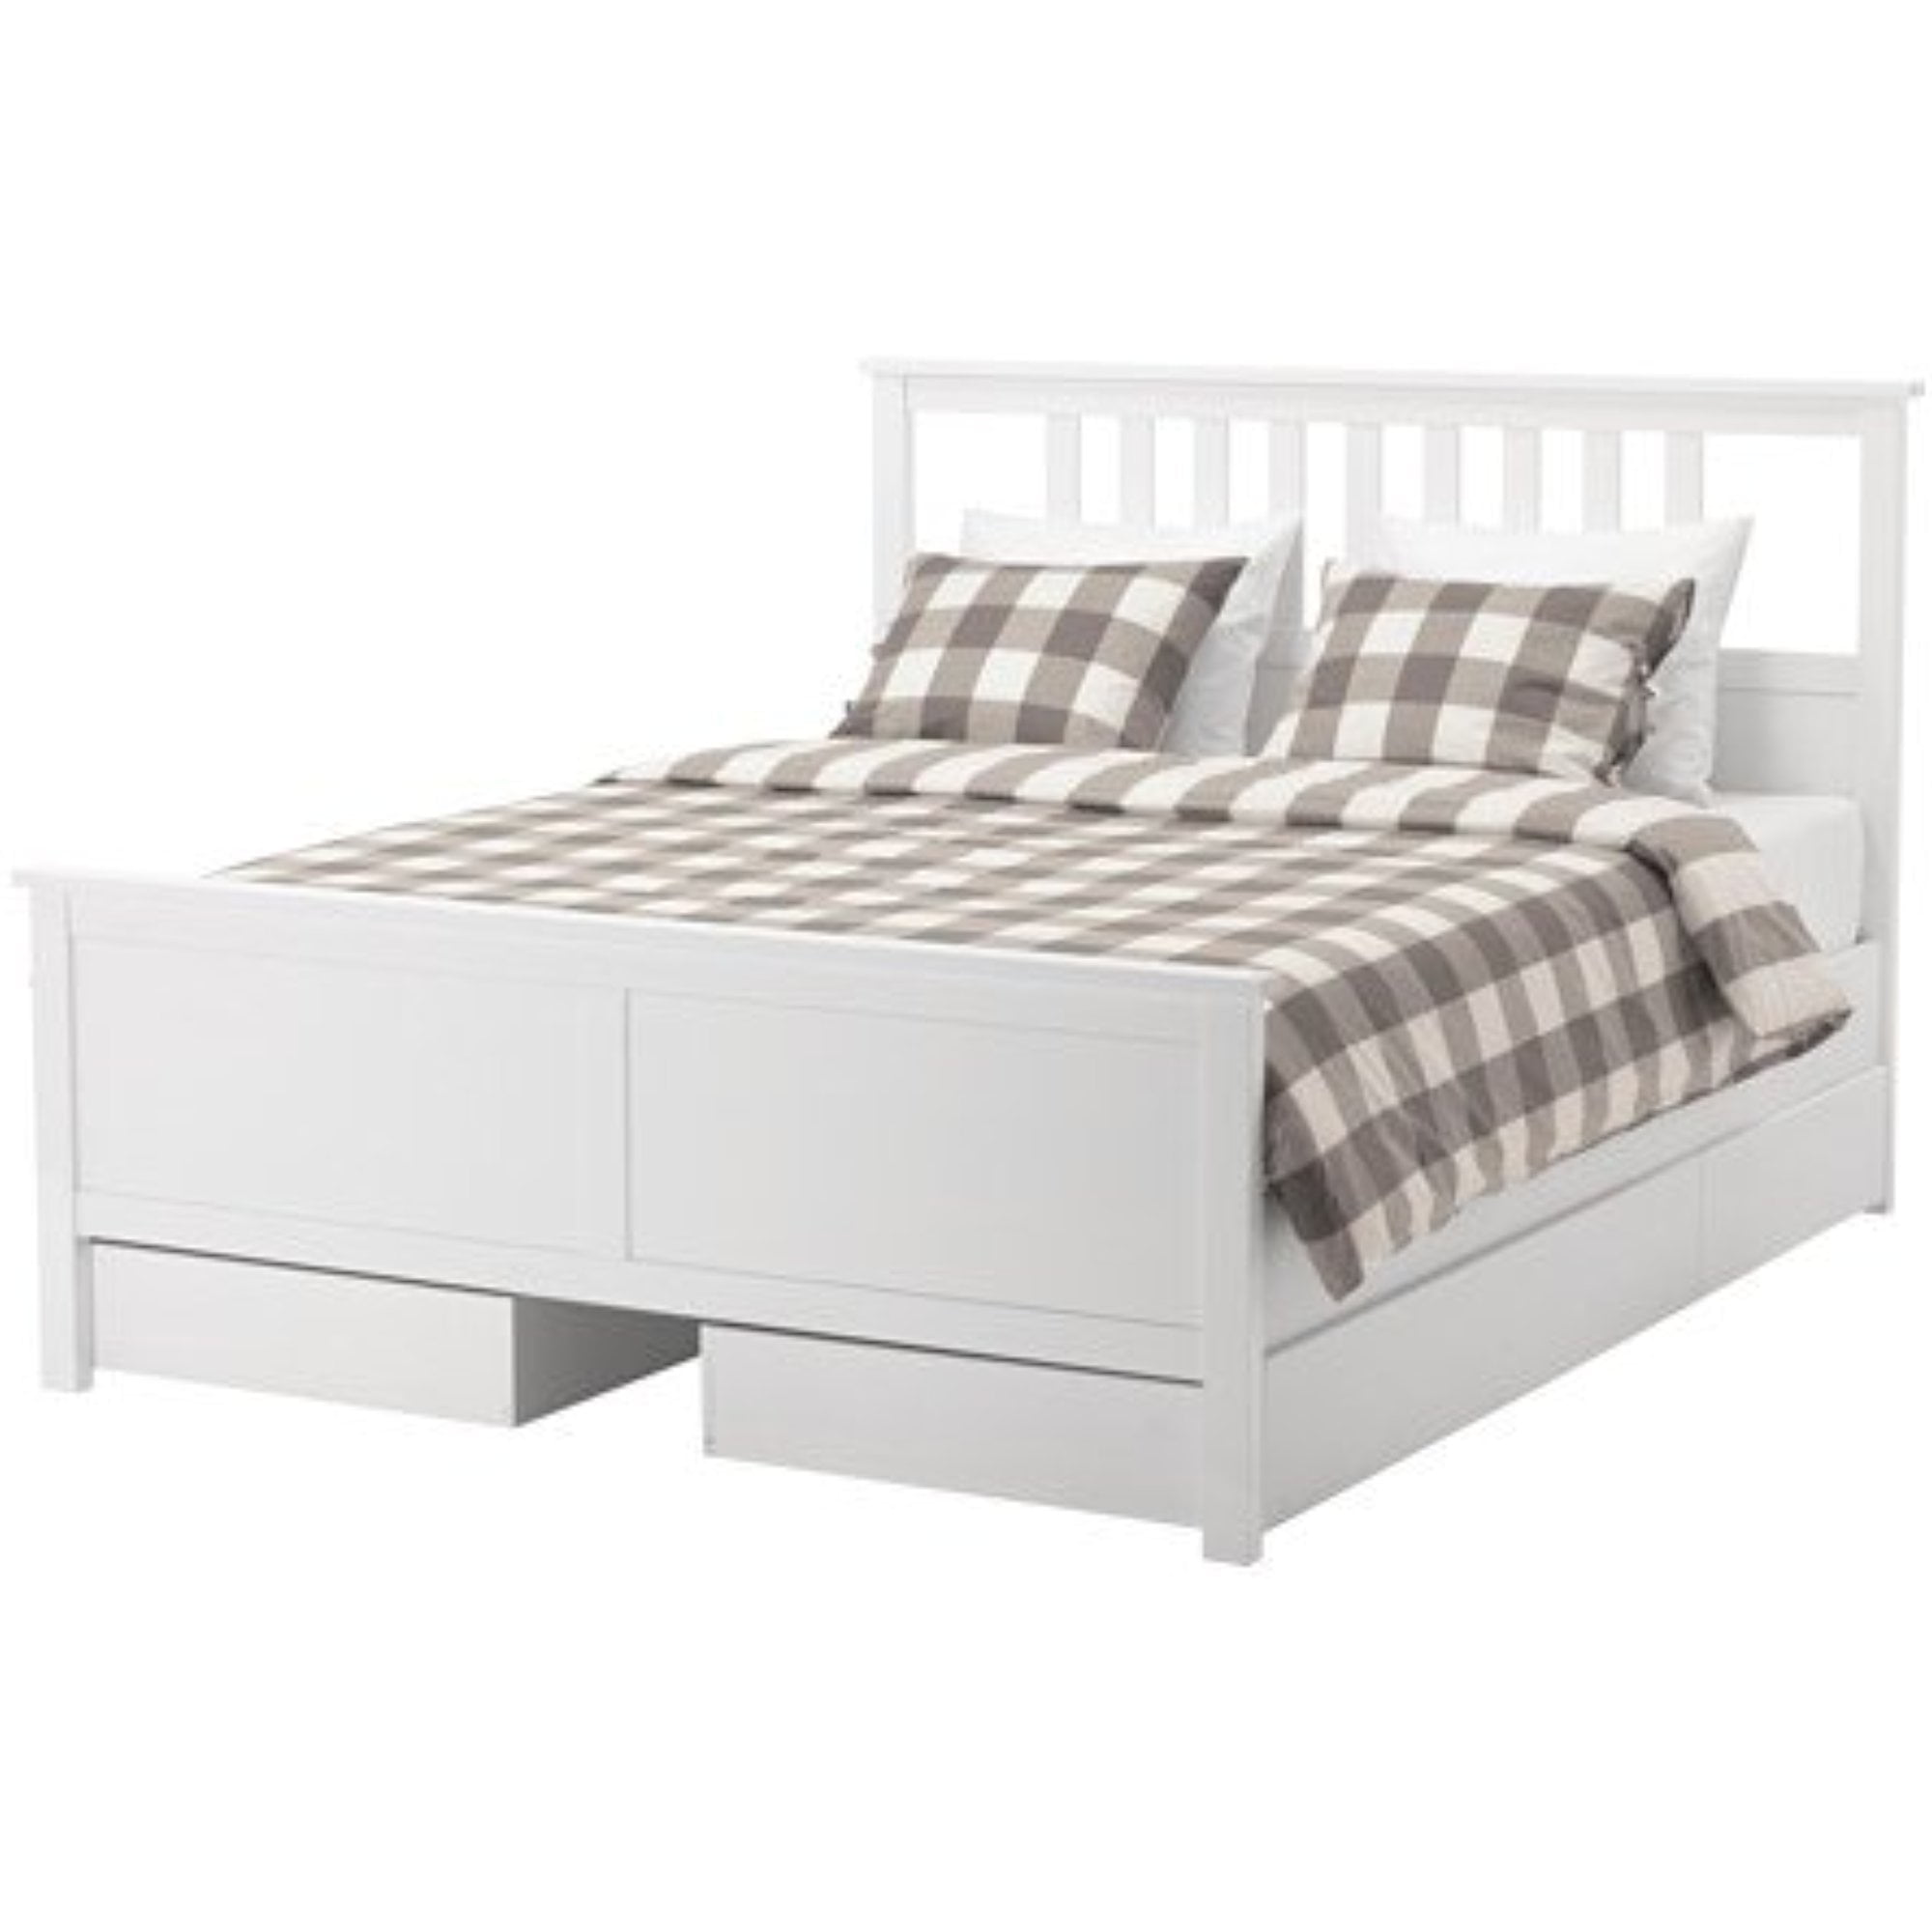 Ikea King Size Bed Frame With 4 Storage, King Single Bed With Storage Ikea